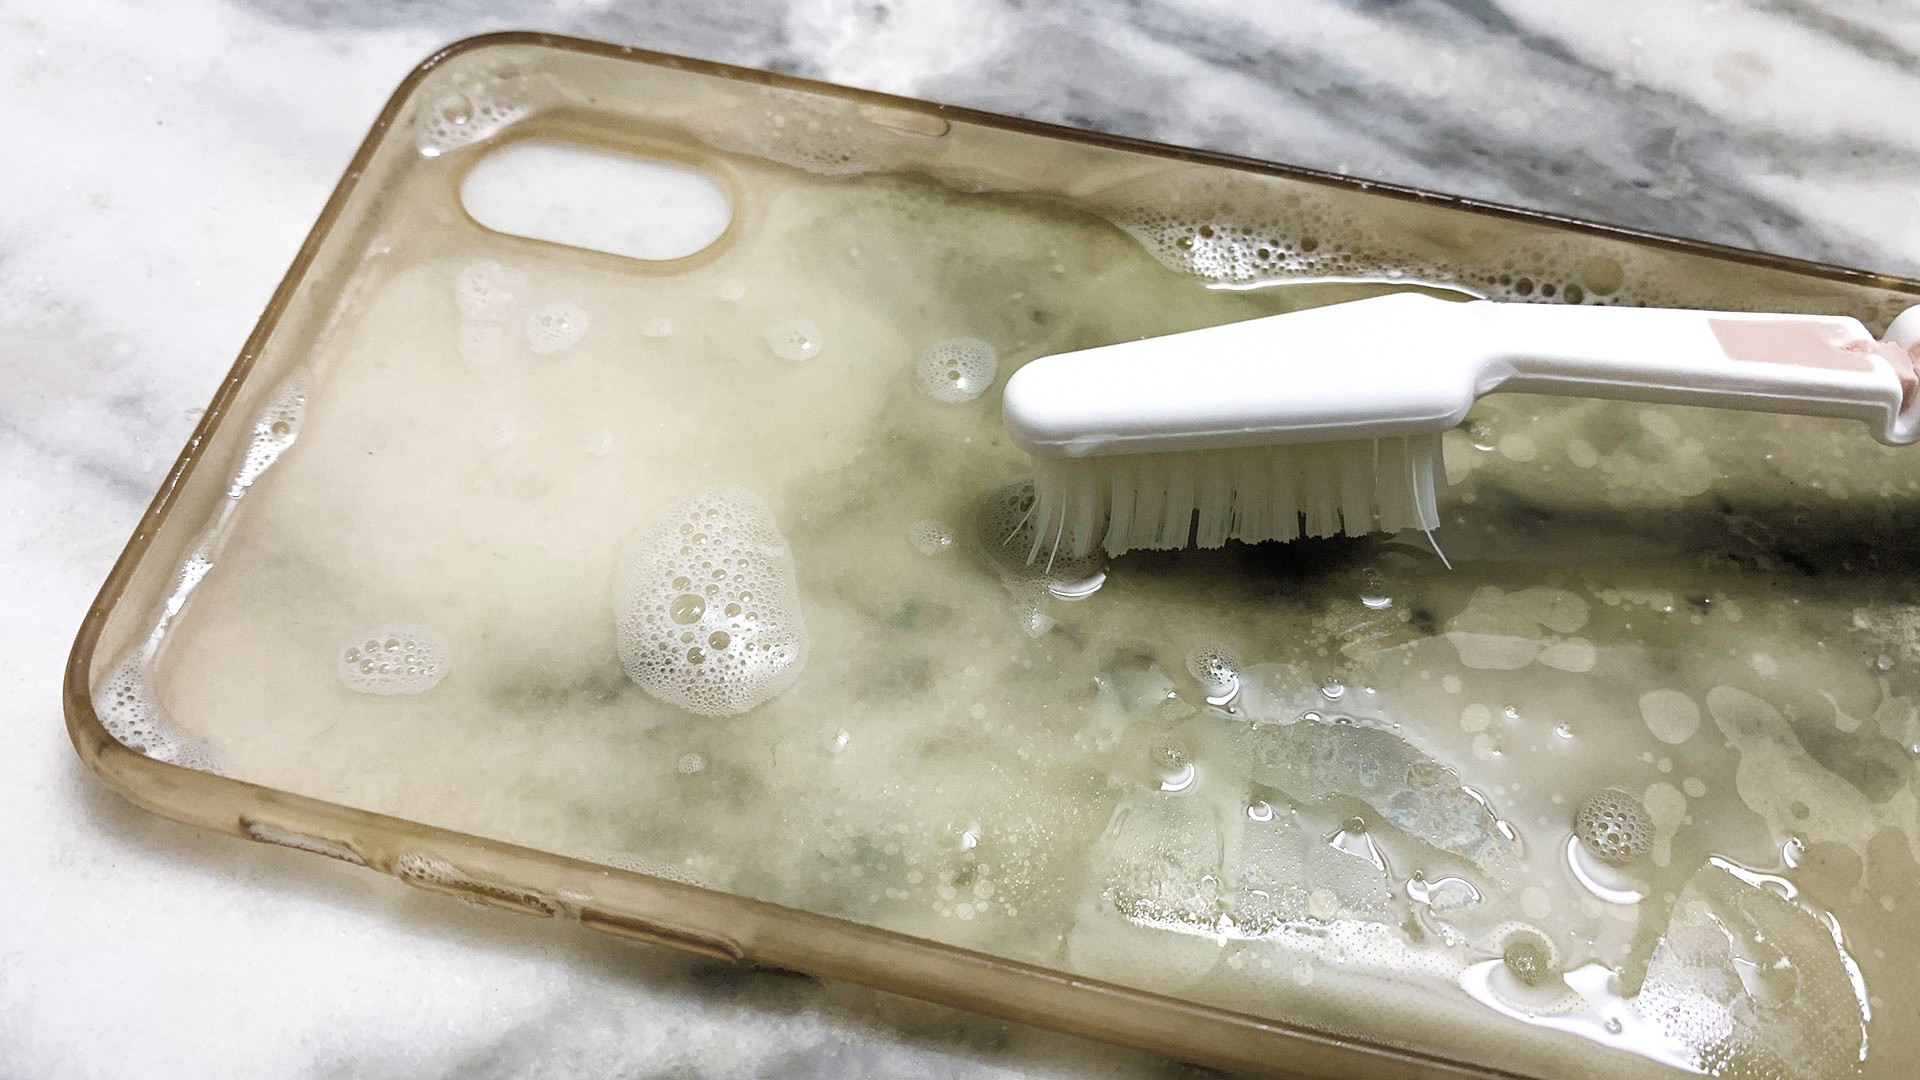 Showing Clean silicon case of iPhone with water and dish soap